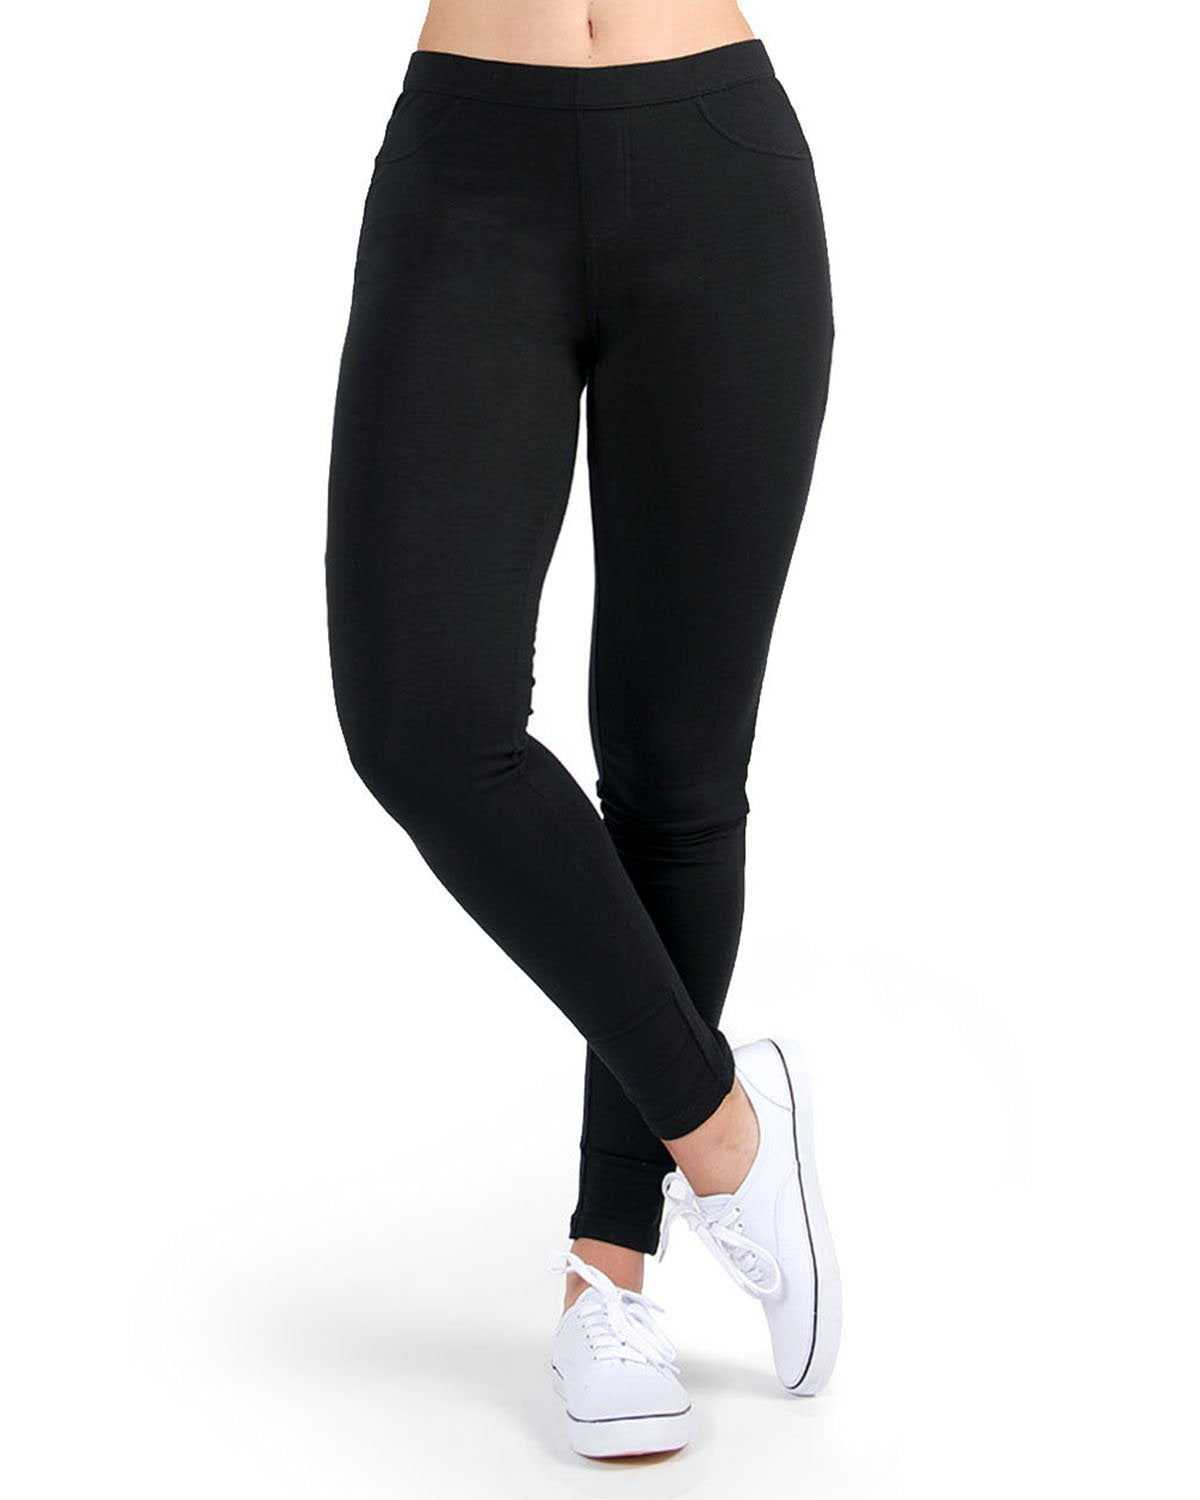 Cotton Kitty Women's French Terry Bell Bottom Yoga Pants with Pockets –  COTTON KITTY